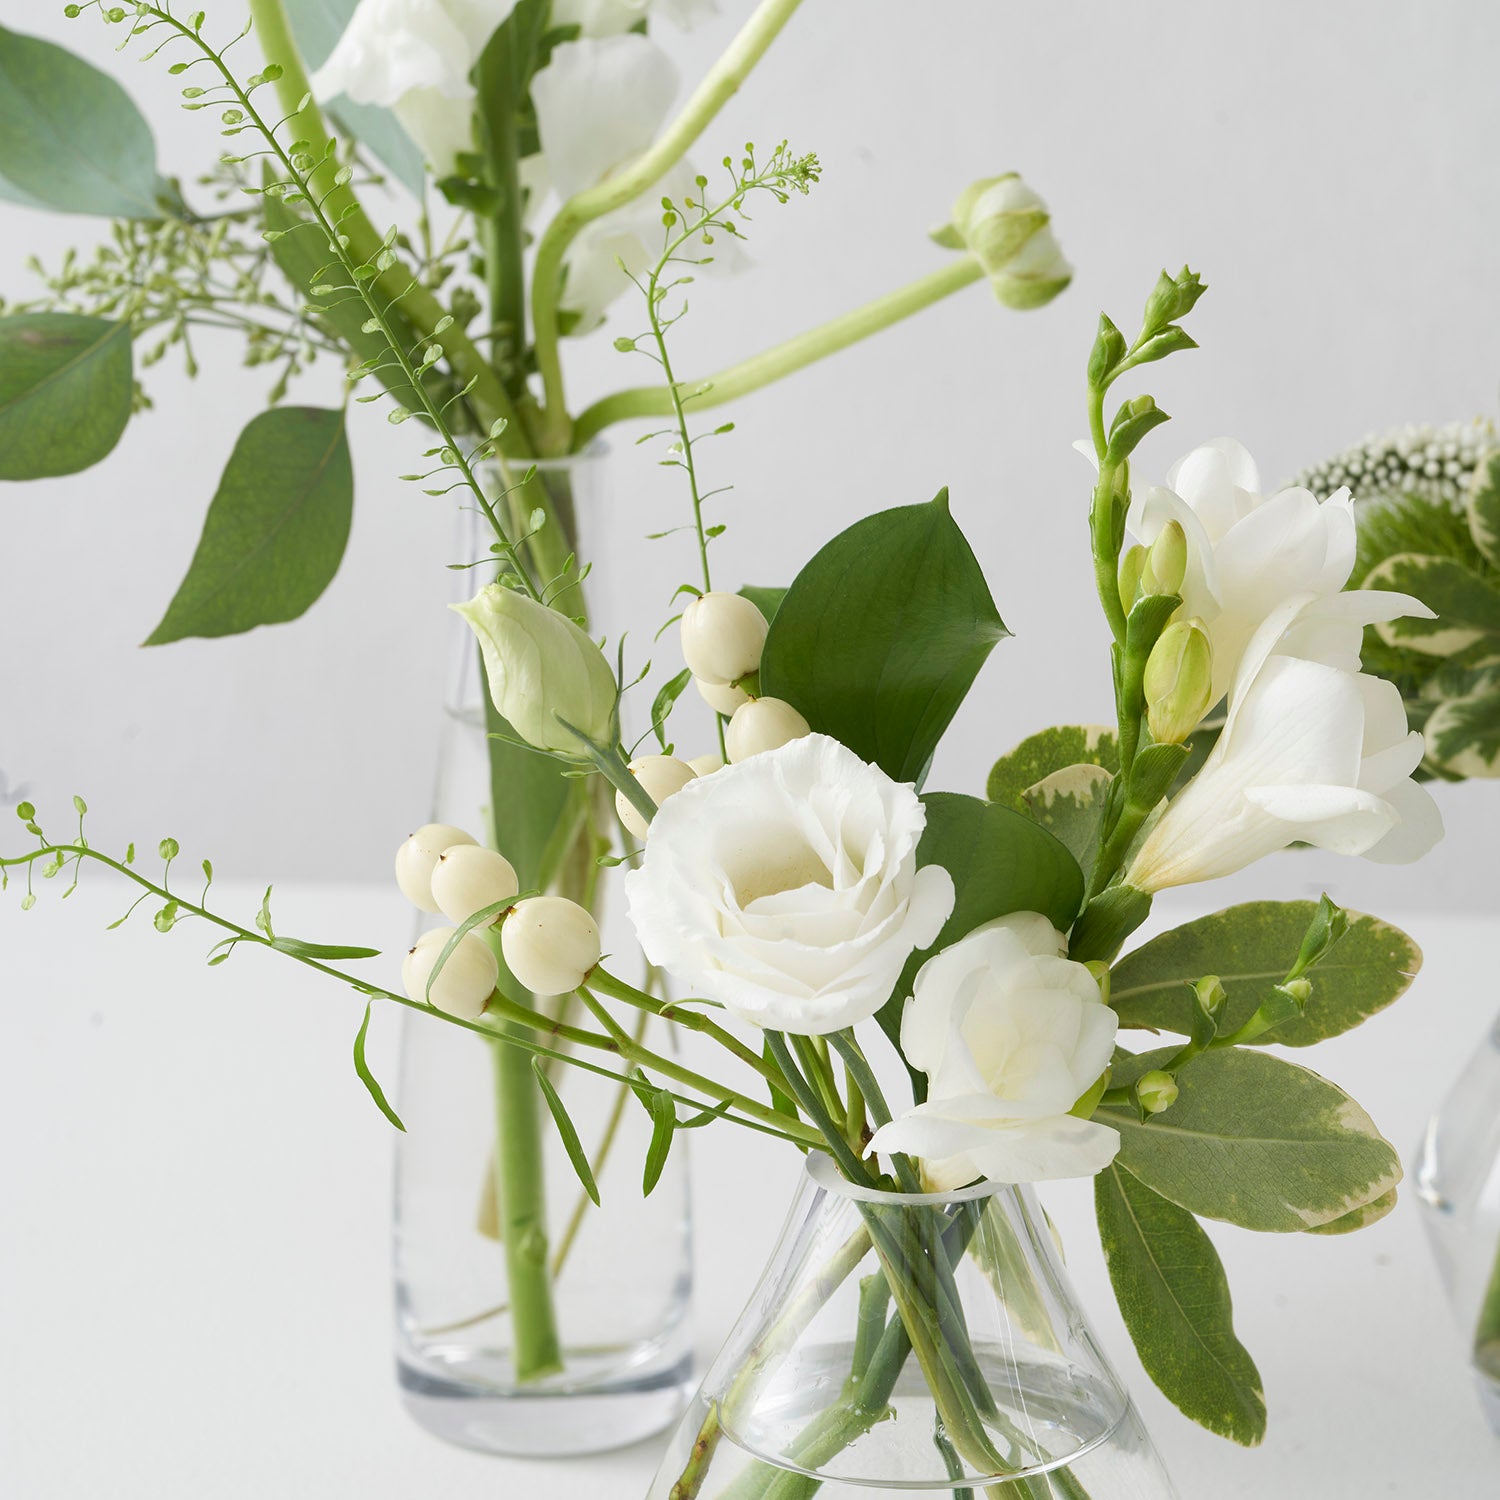 Closeup of small glasse vases with white and green flowers on white background